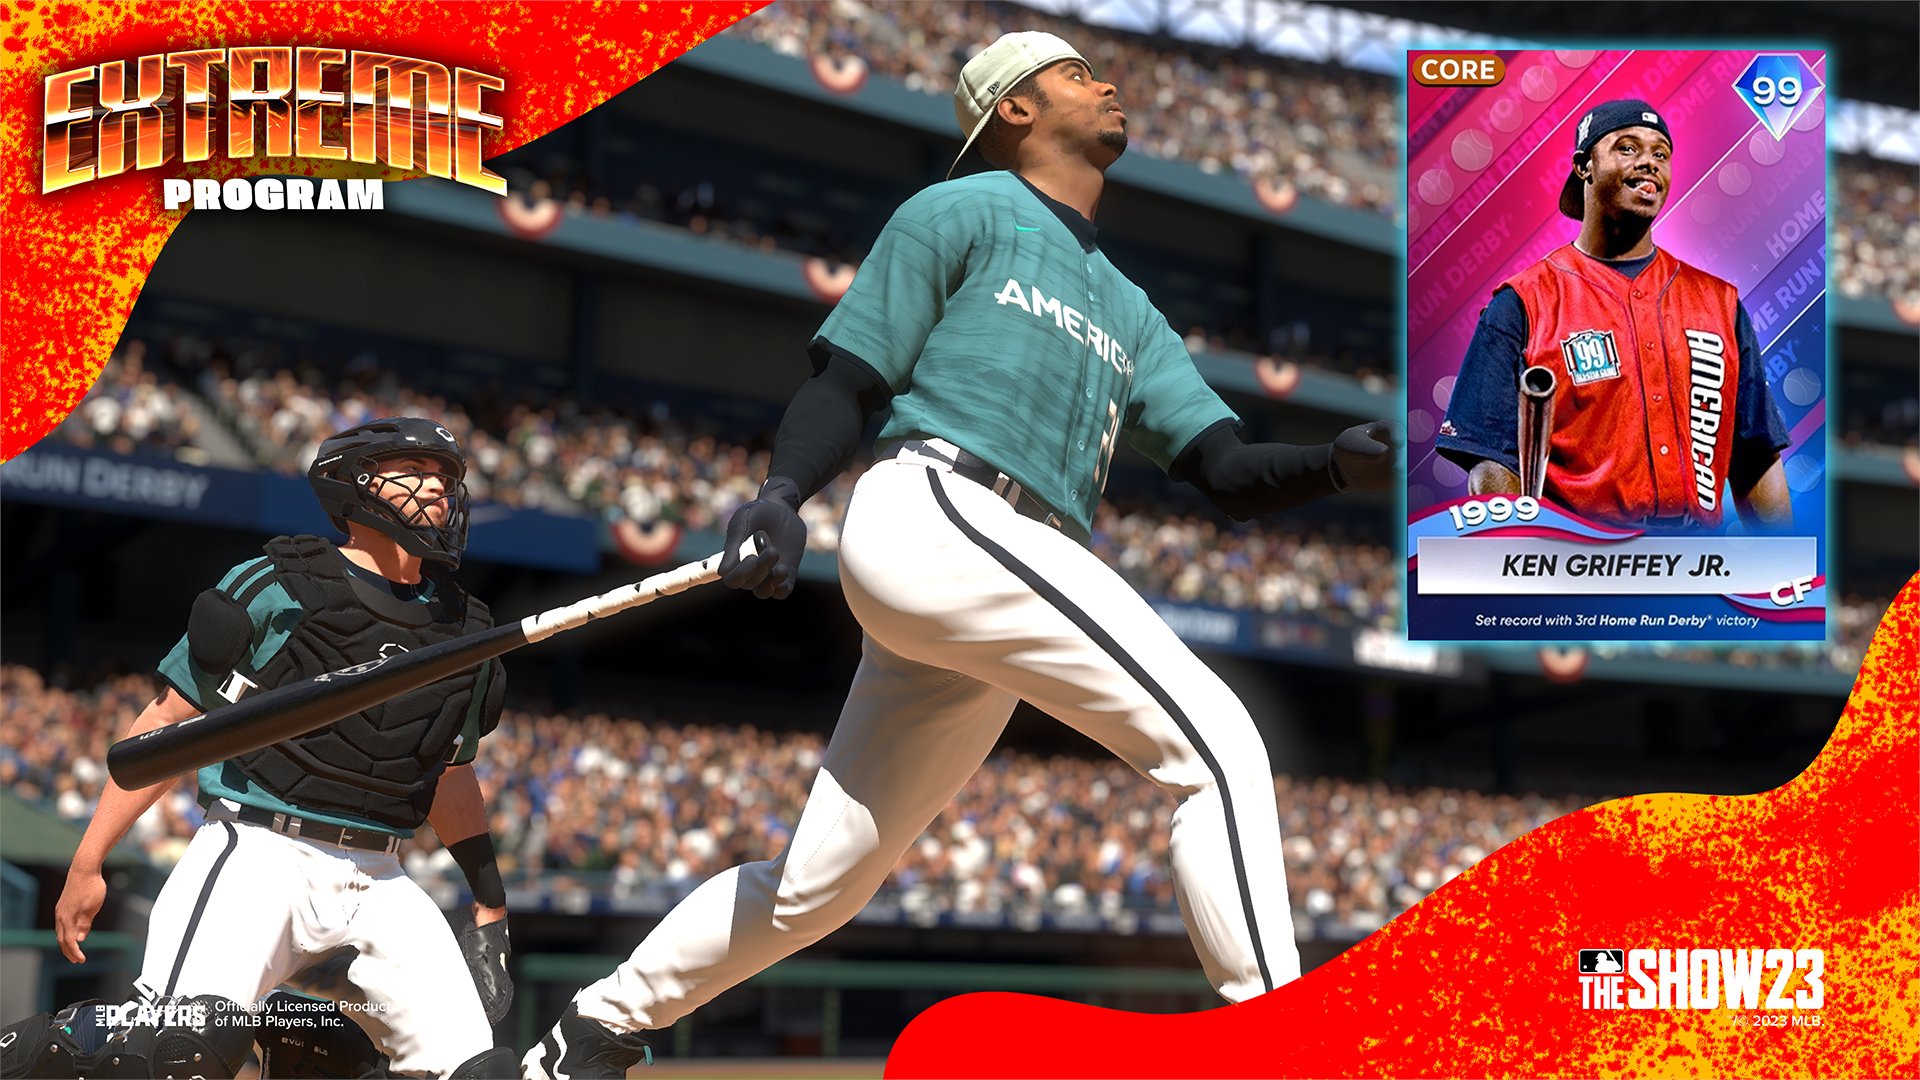 MLB The Show on X: The Kid! 🧢⚾ Ken Griffey Jr. put on a show